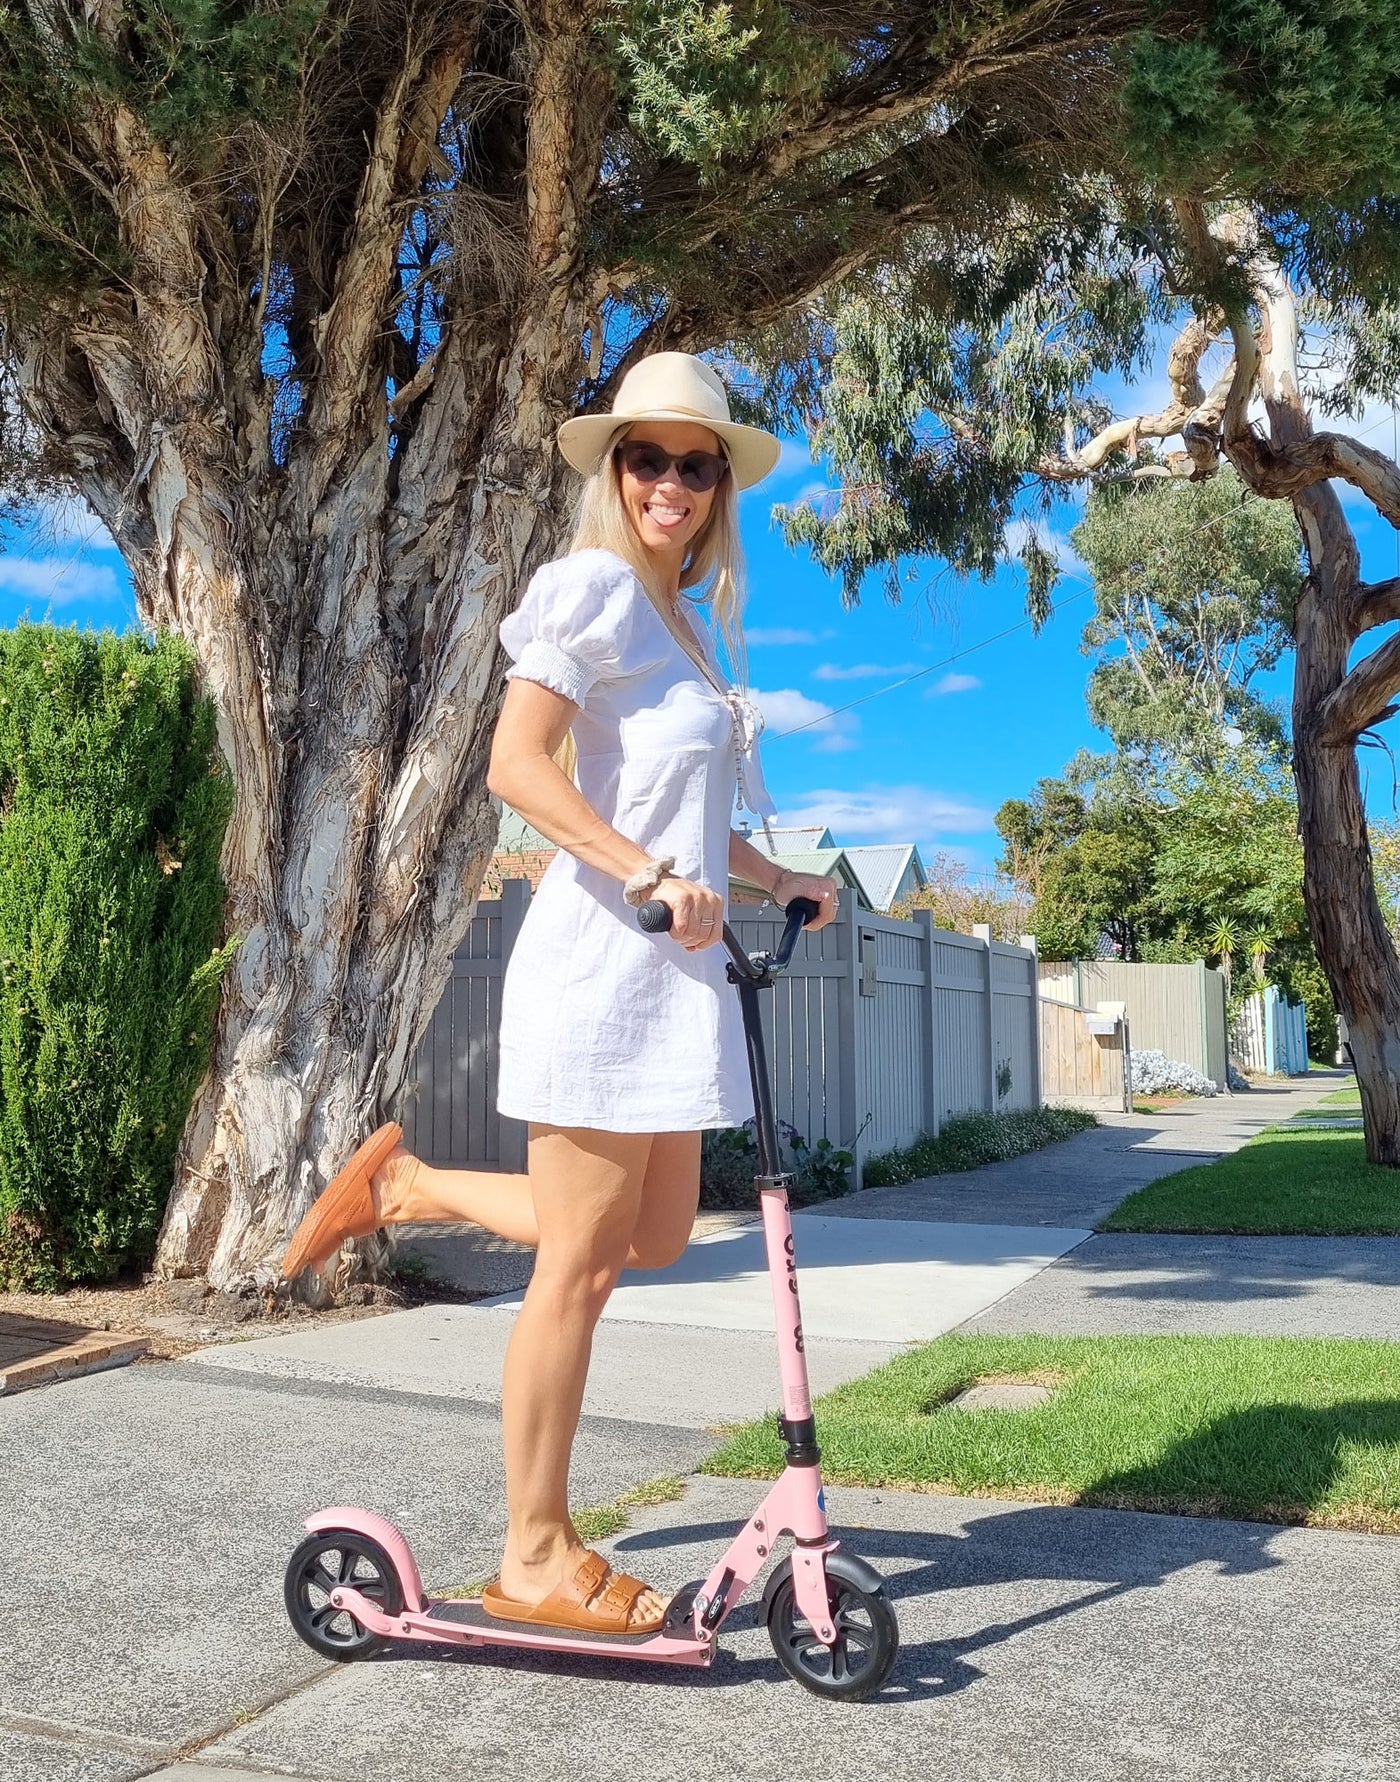 woman on her neon rose pink speed plus deluxe adult scooter